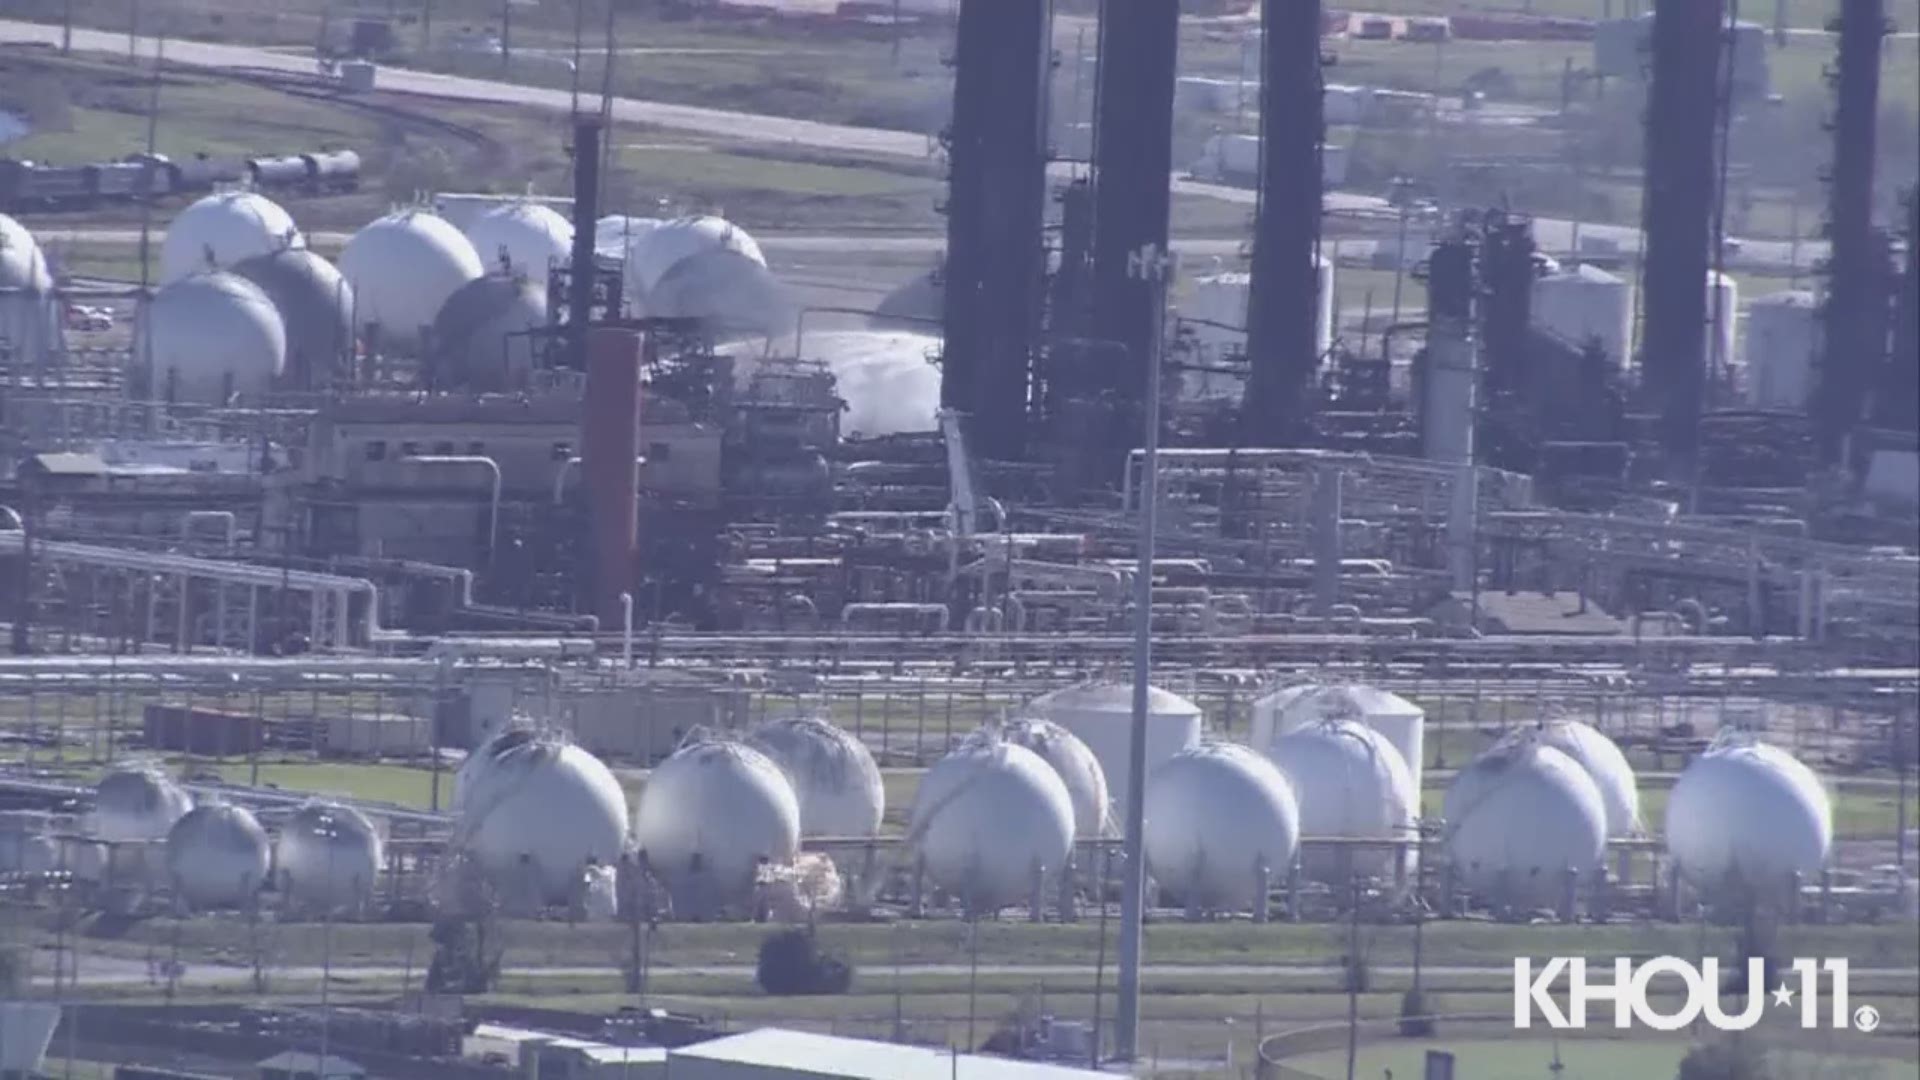 Port Neches residents heard a loud boom at the TPC plant Monday morning, but officials said there is no cause for concern.